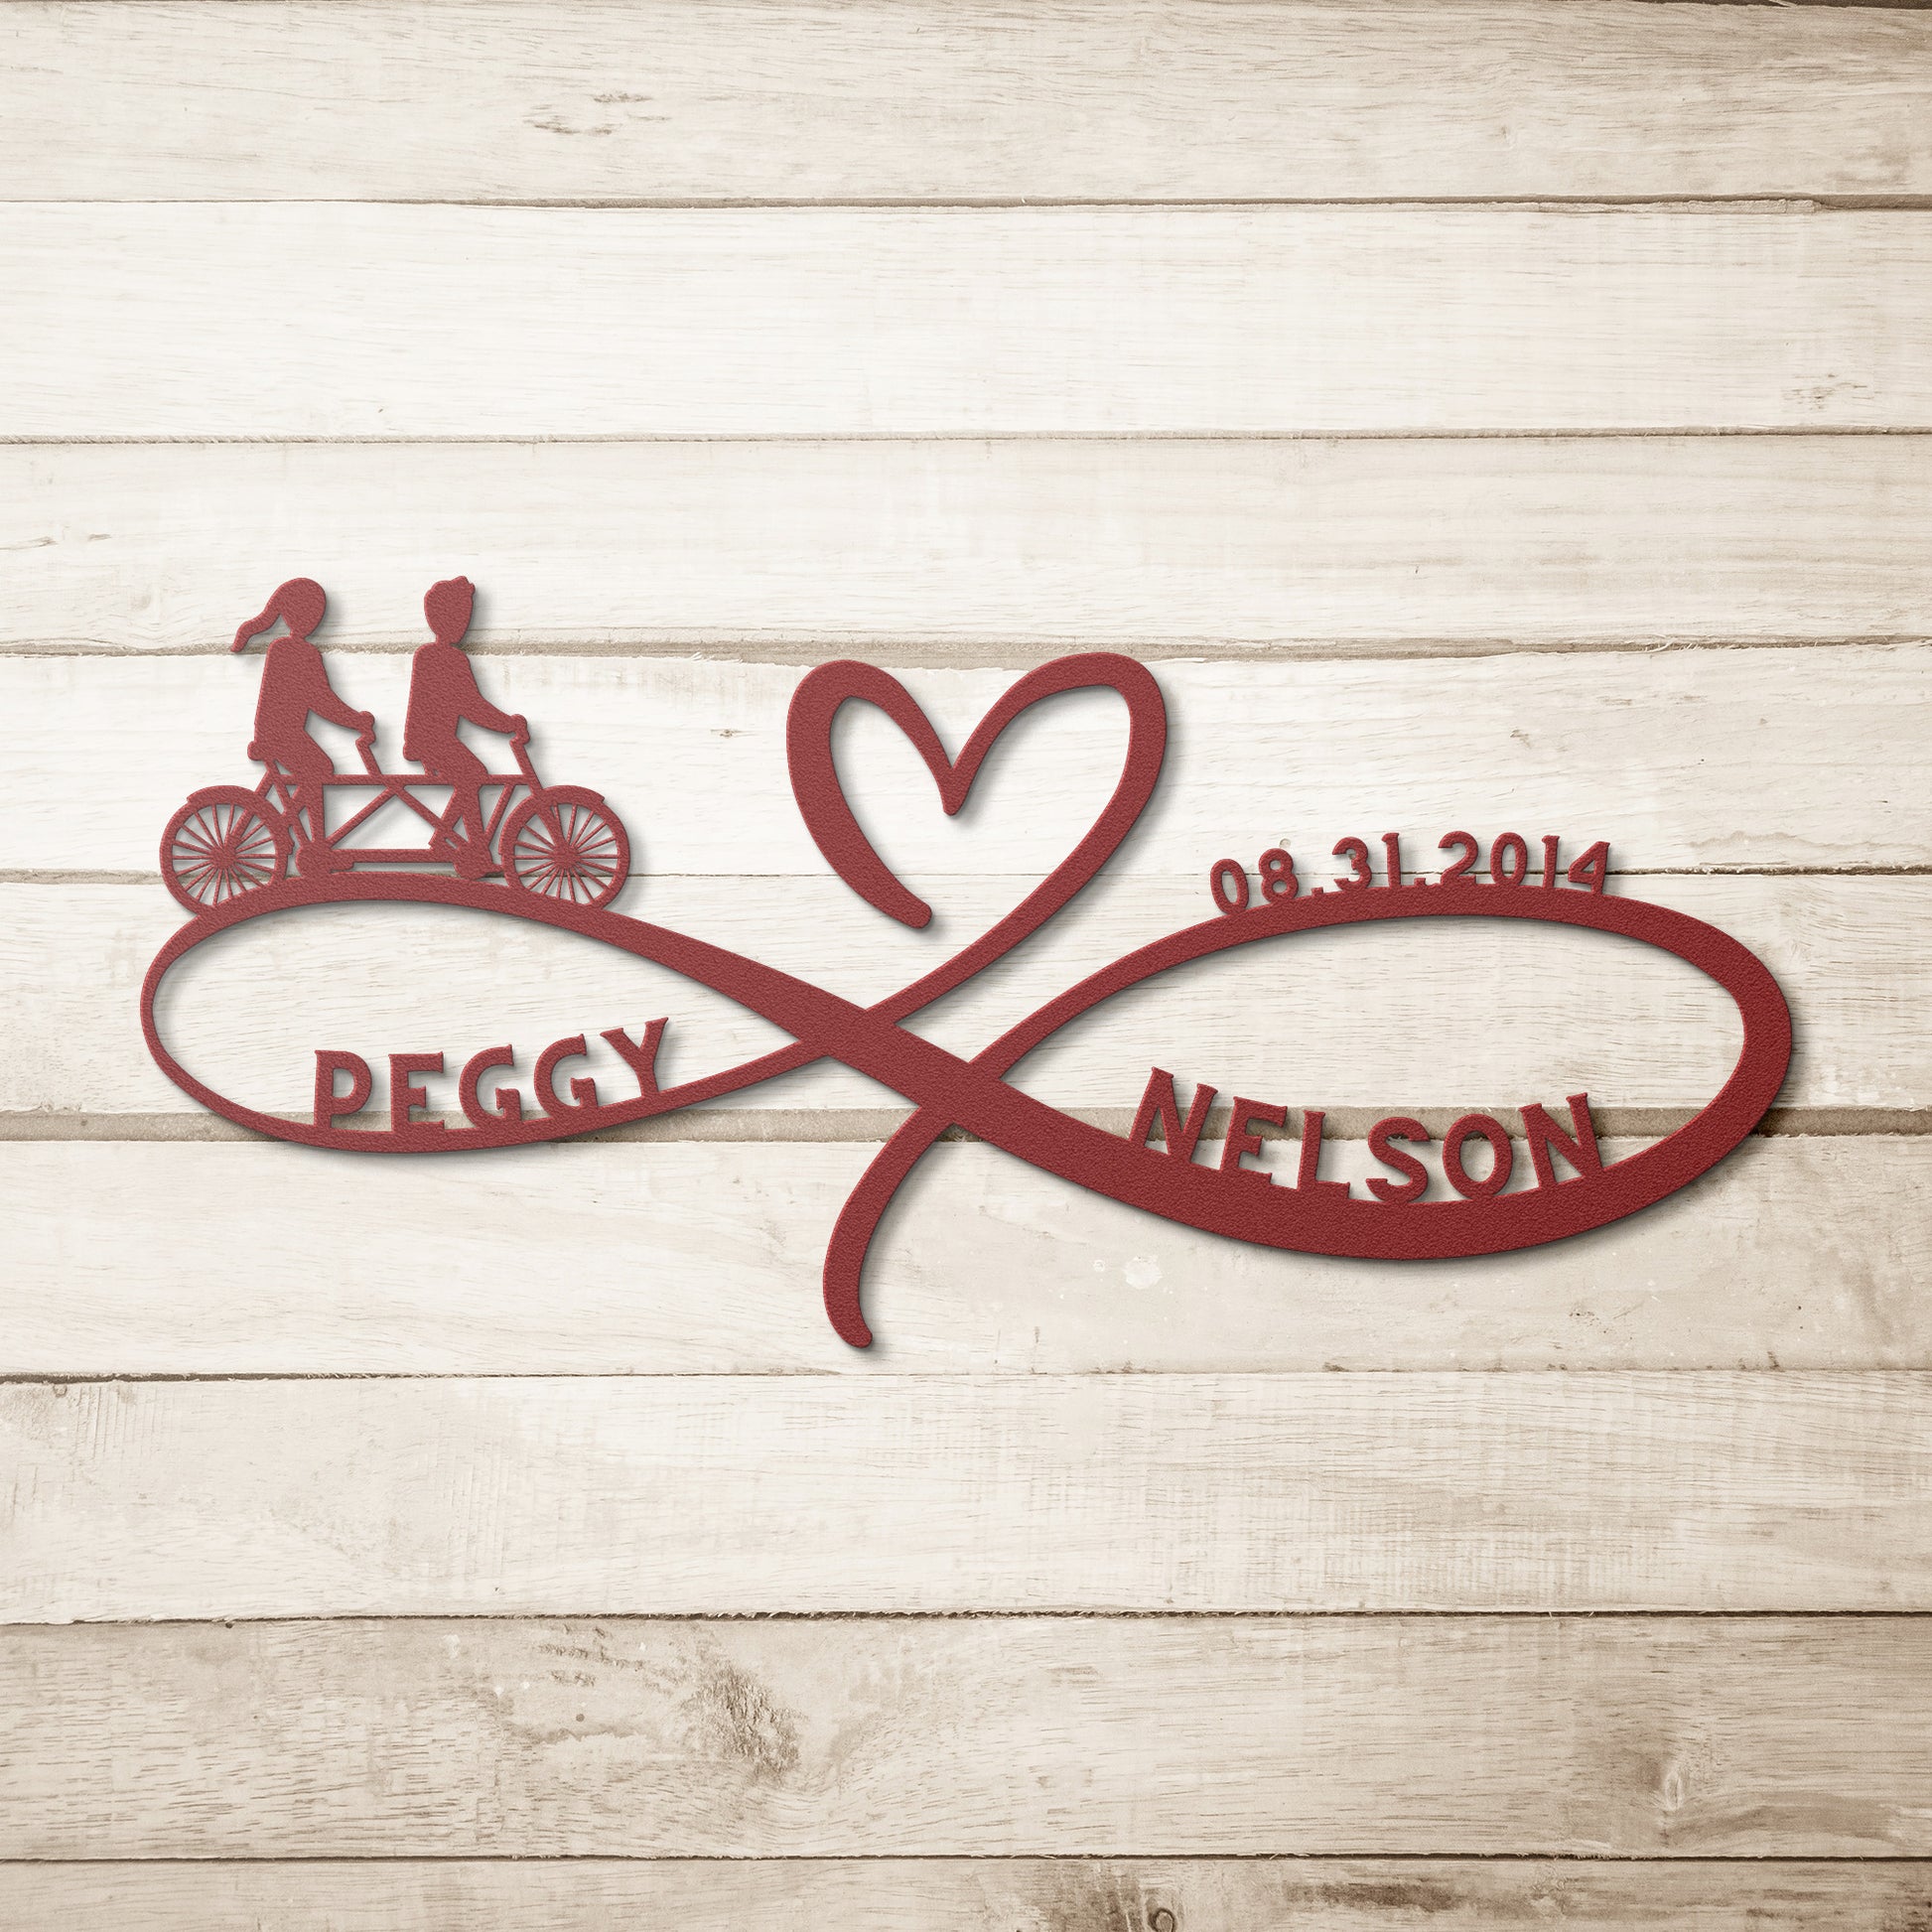 A teelaunch powder coated metal sign featuring the Personalized Infinity Love Heart Metal Sign For Cycling Couples, perfect for home decor.